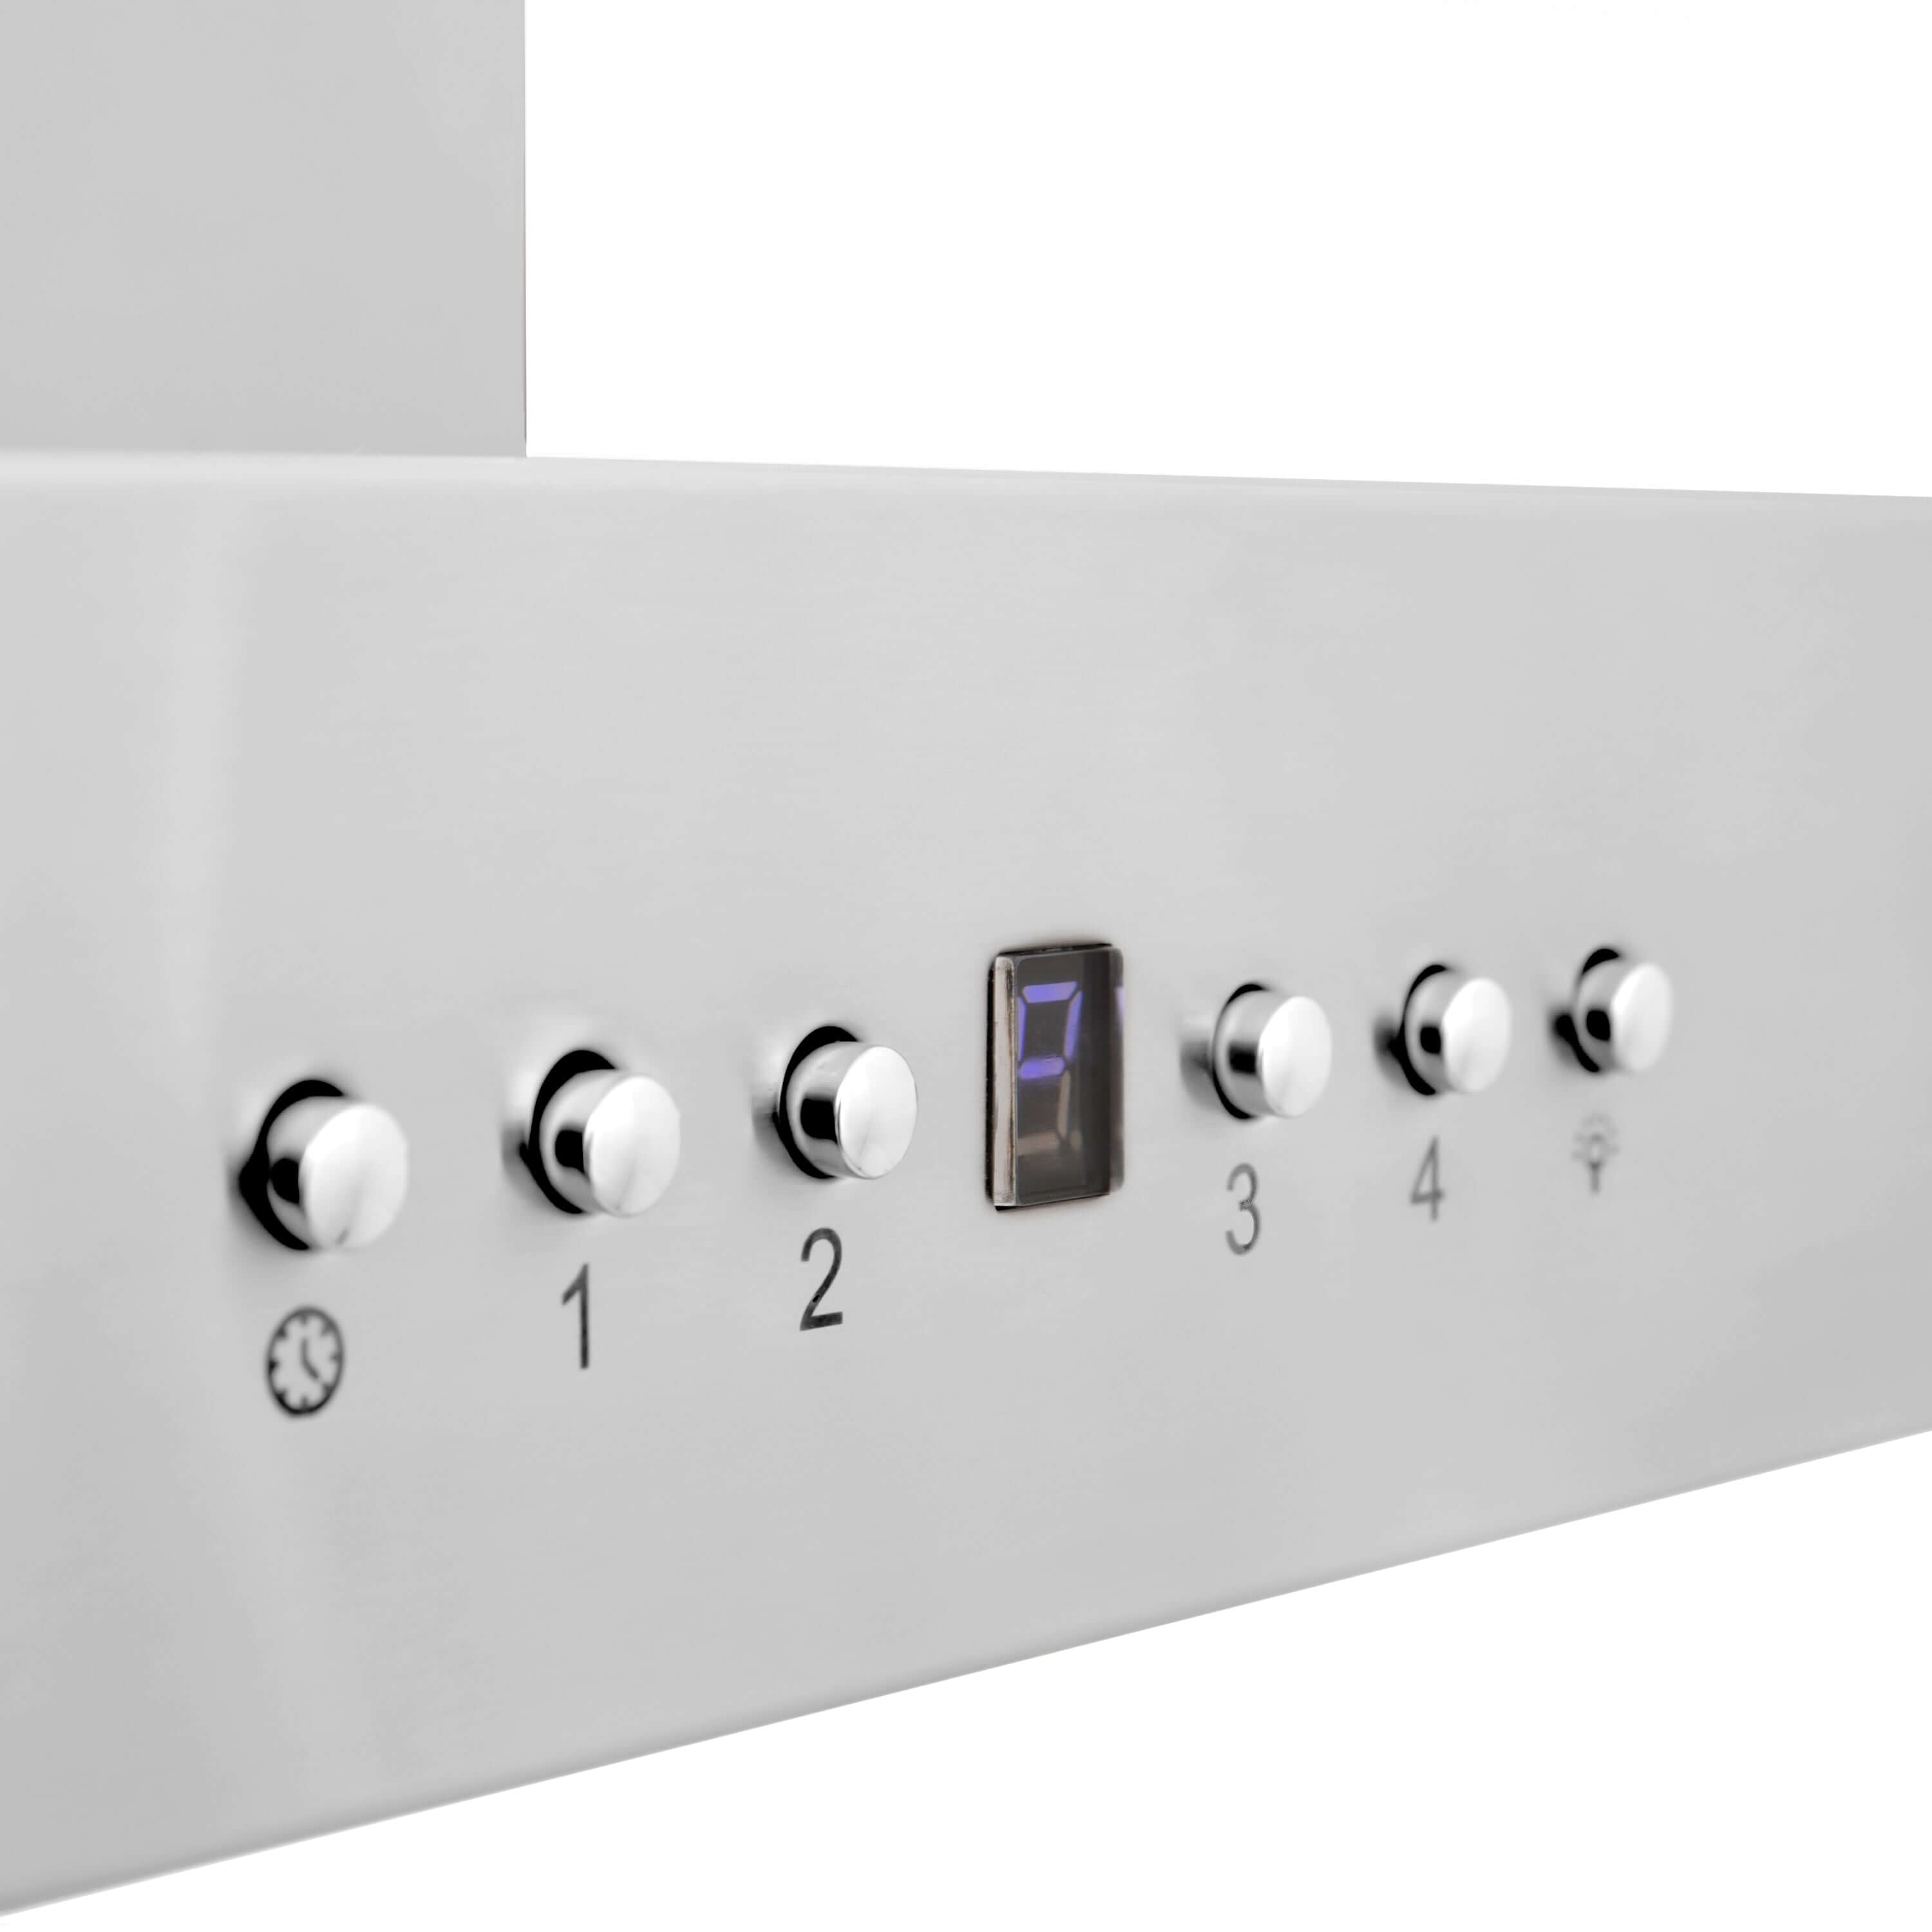 ZLINE Convertible Vent Wall Mount Range Hood in Stainless Steel (KB) has a 6-button control panel and LED display